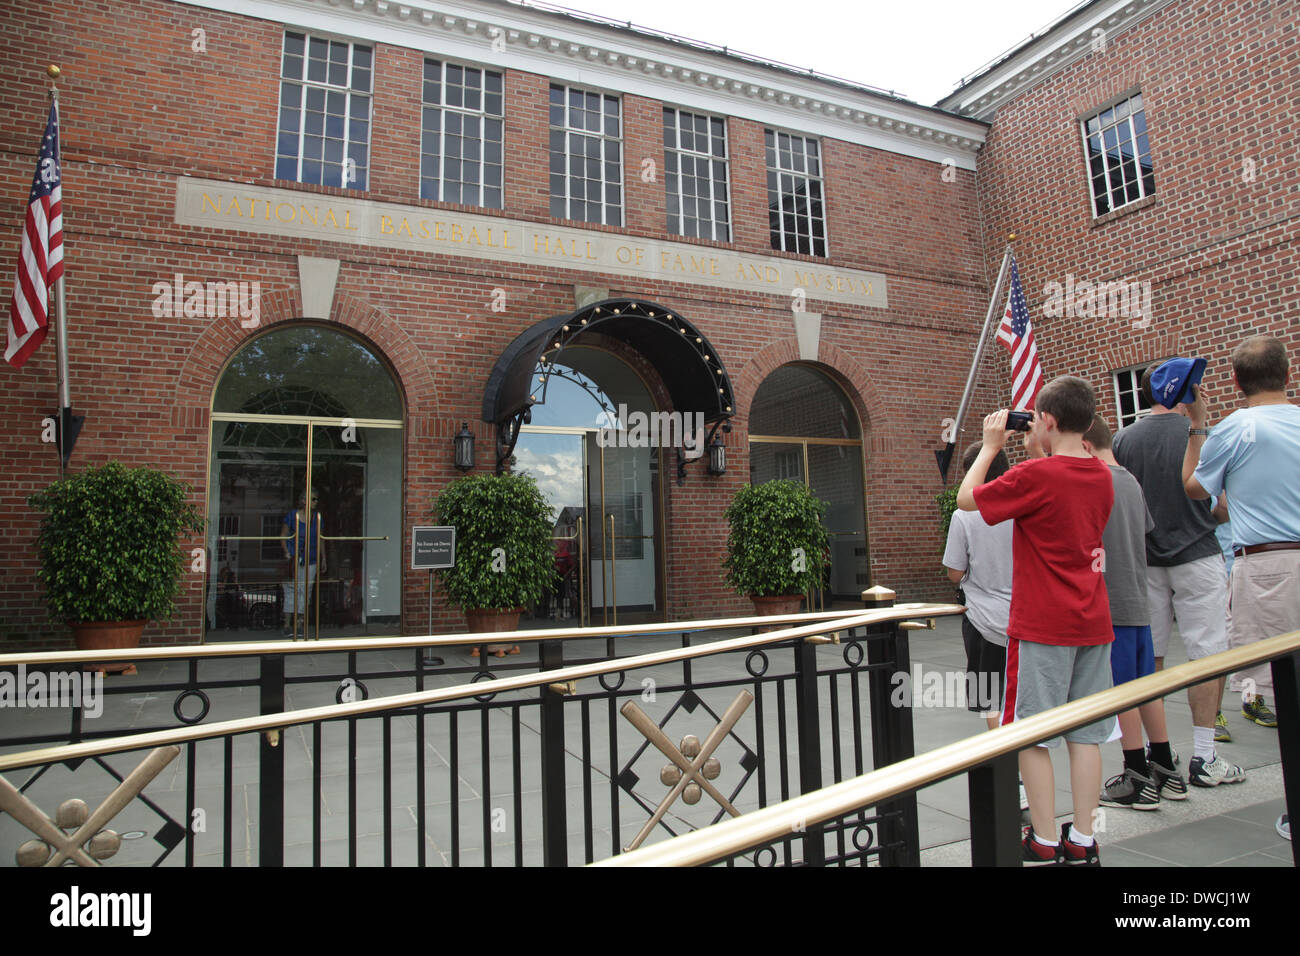 Cooperstown Baseball Hall des Ruhmes - nationaler Baseball Hall des Ruhmes und museum Stockfoto